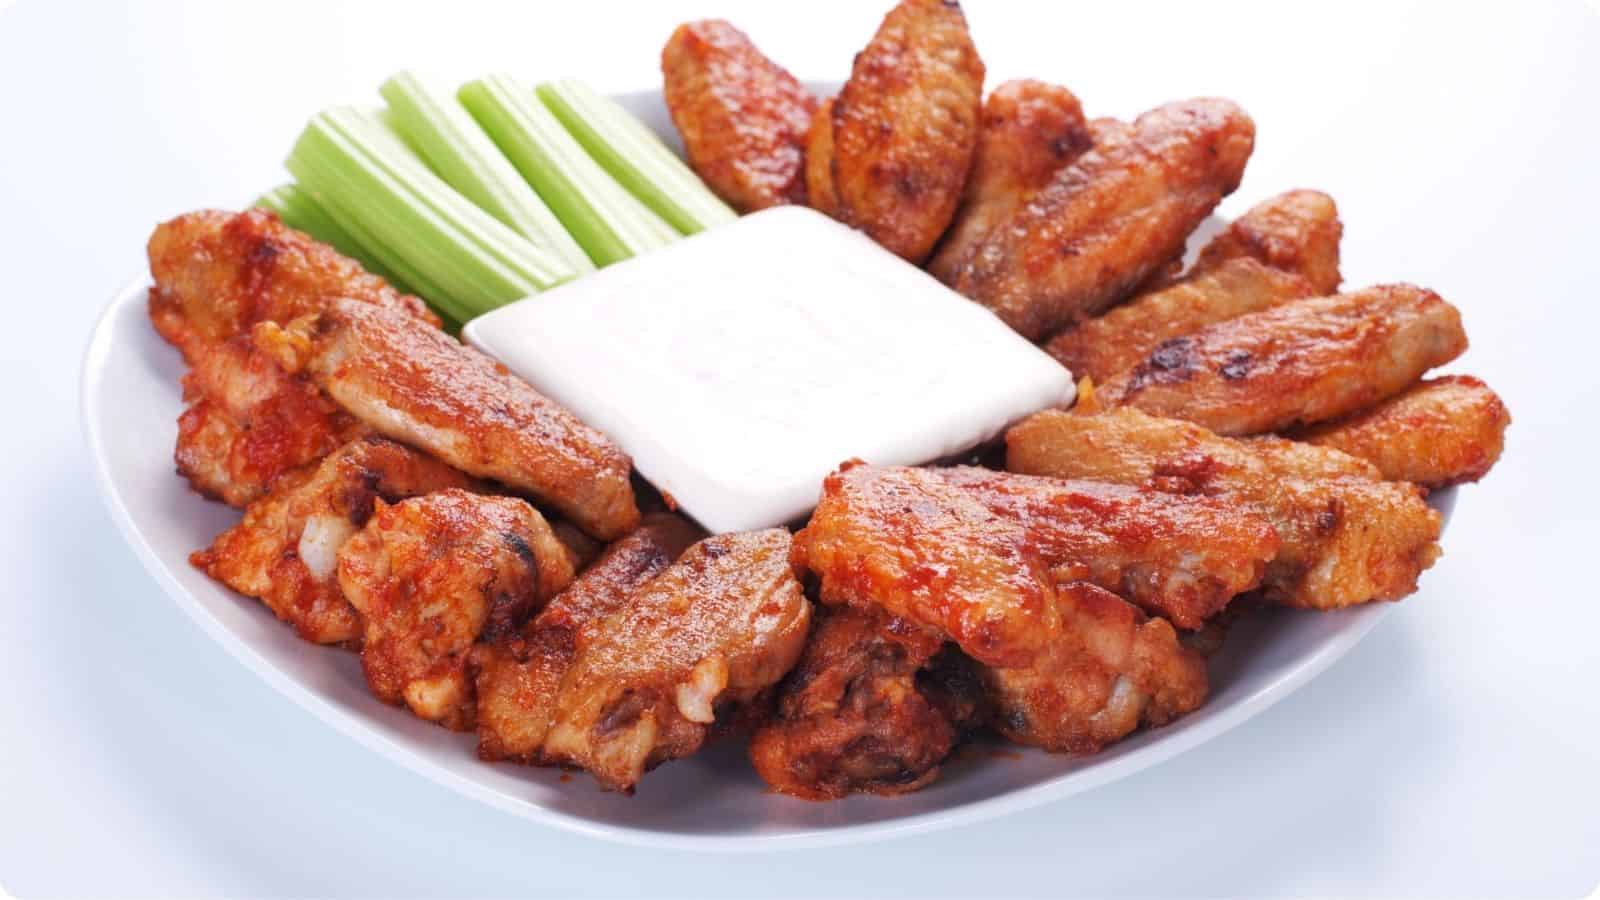 Buffalo Wings arranged served in a white plate on countertop.